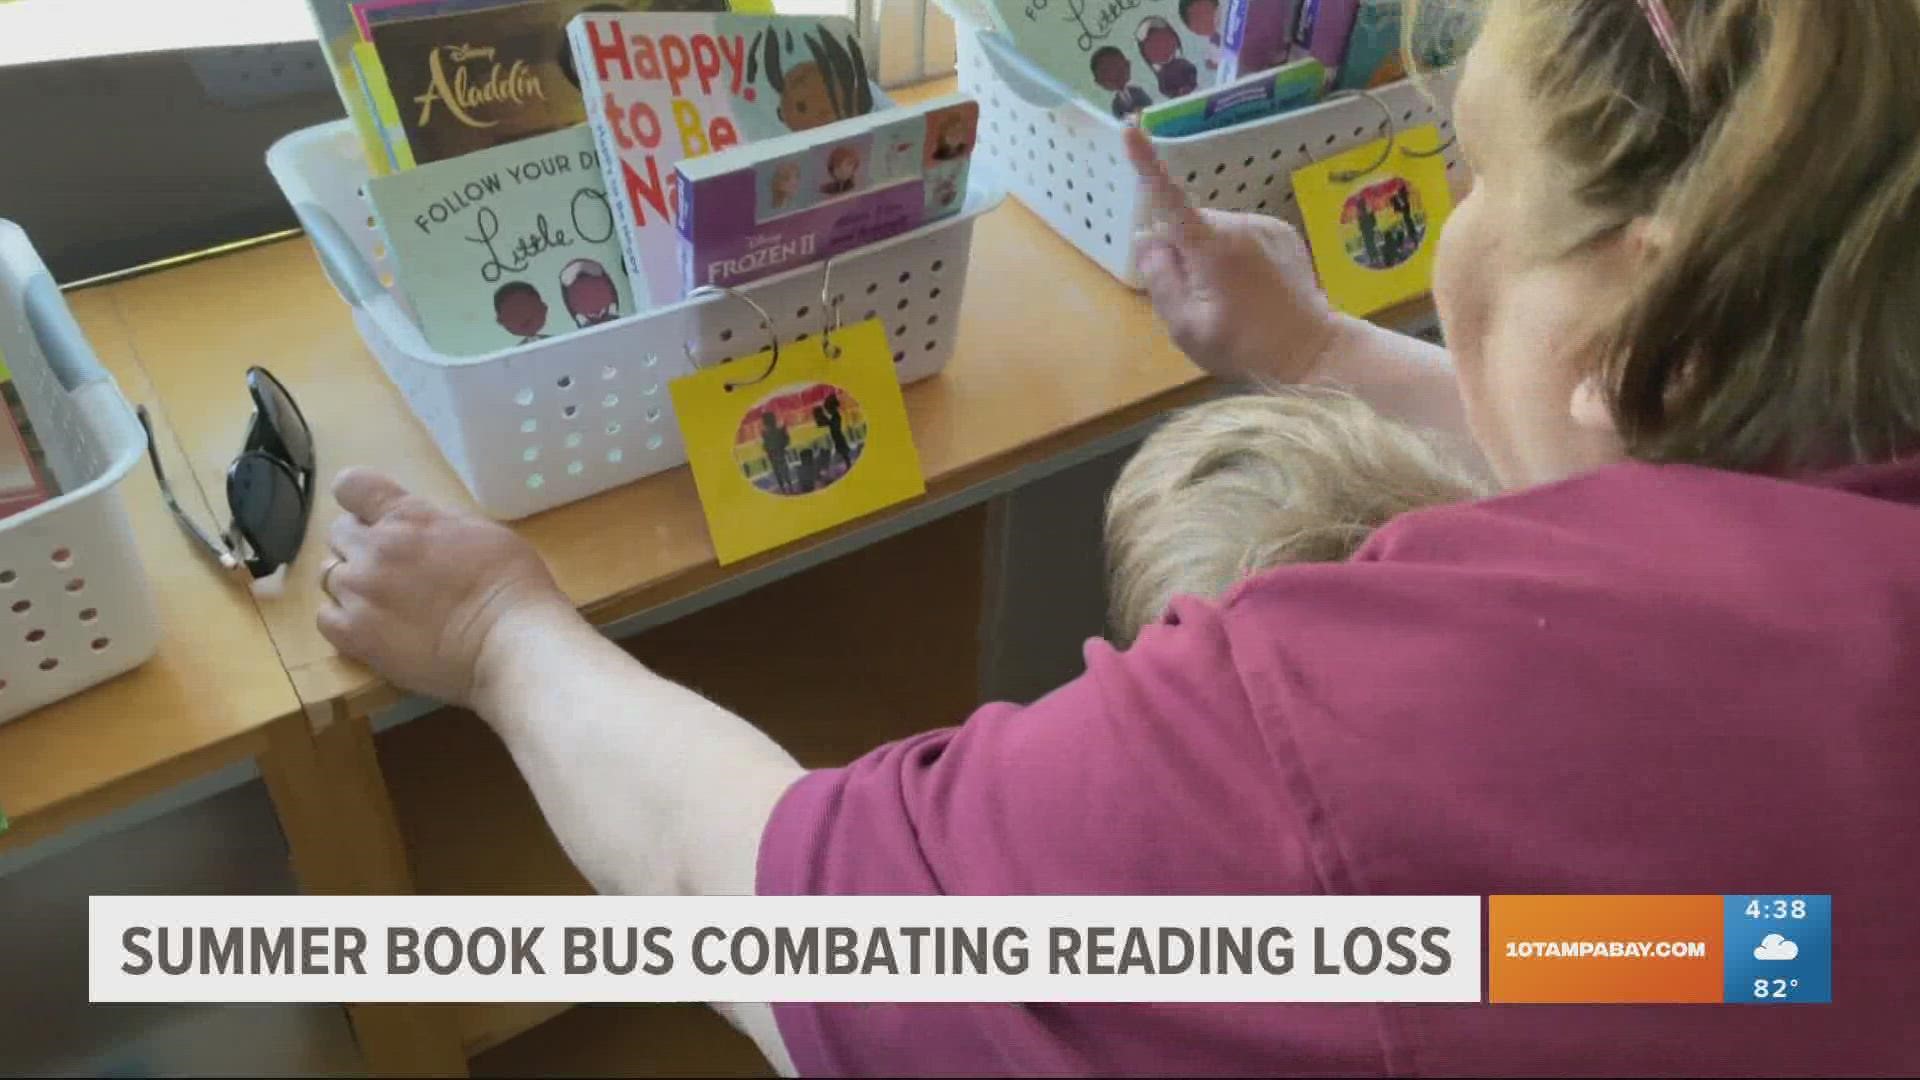 In Pinellas County, the Book Bus is visiting more than 70 sites over the next few weeks to give out free books to children.